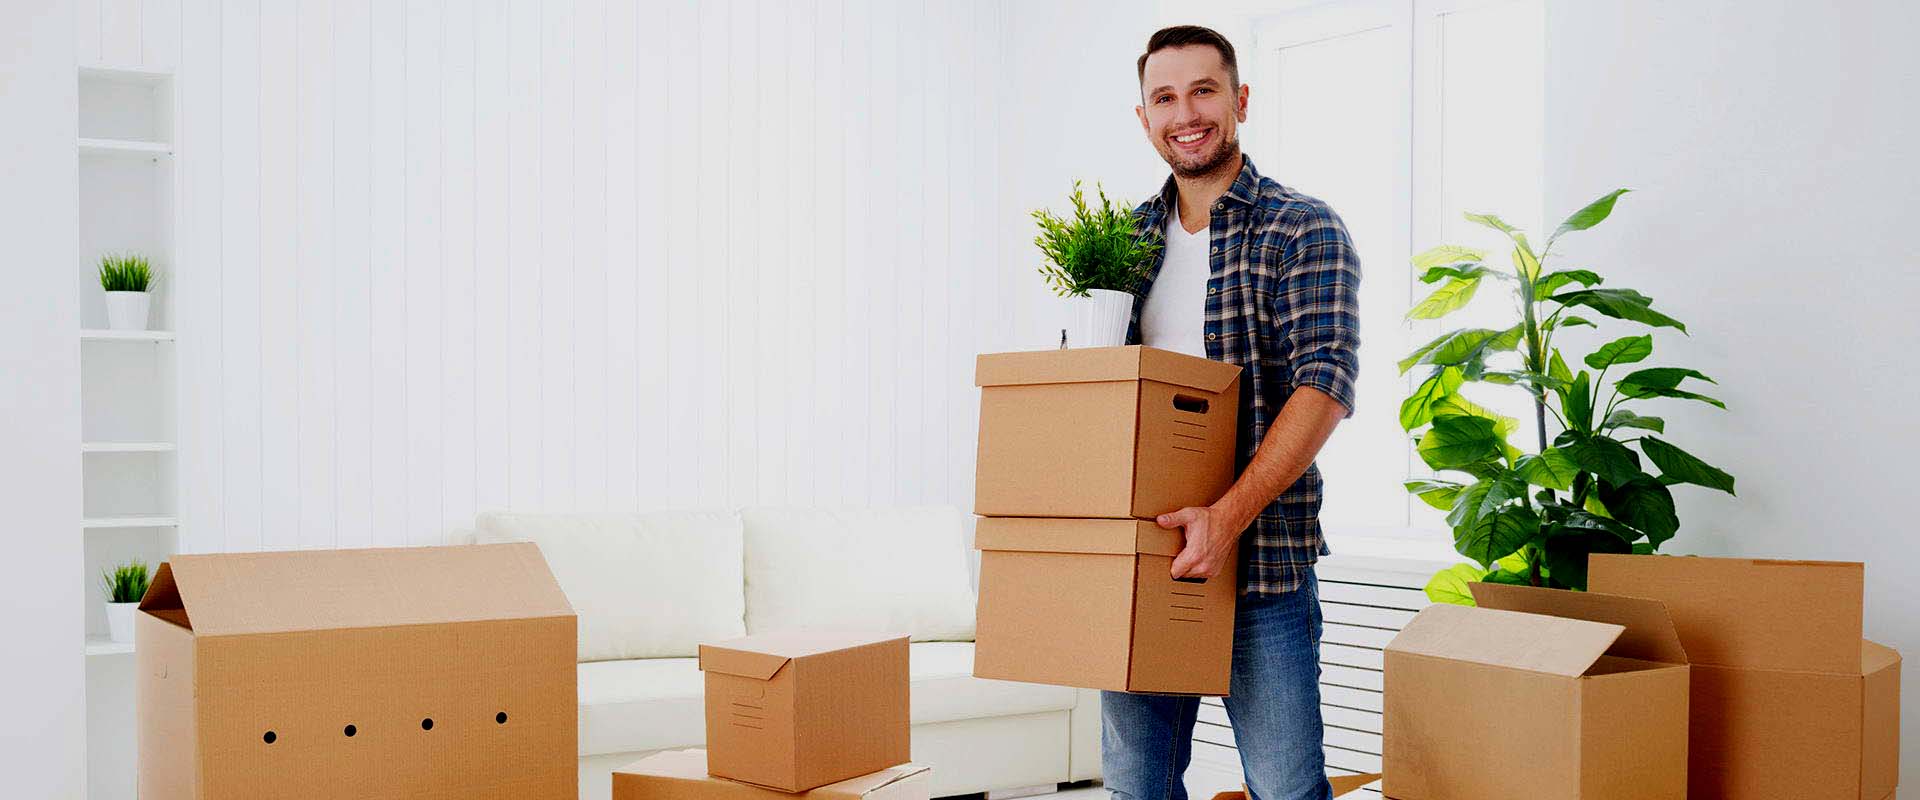 chennai movers and packers